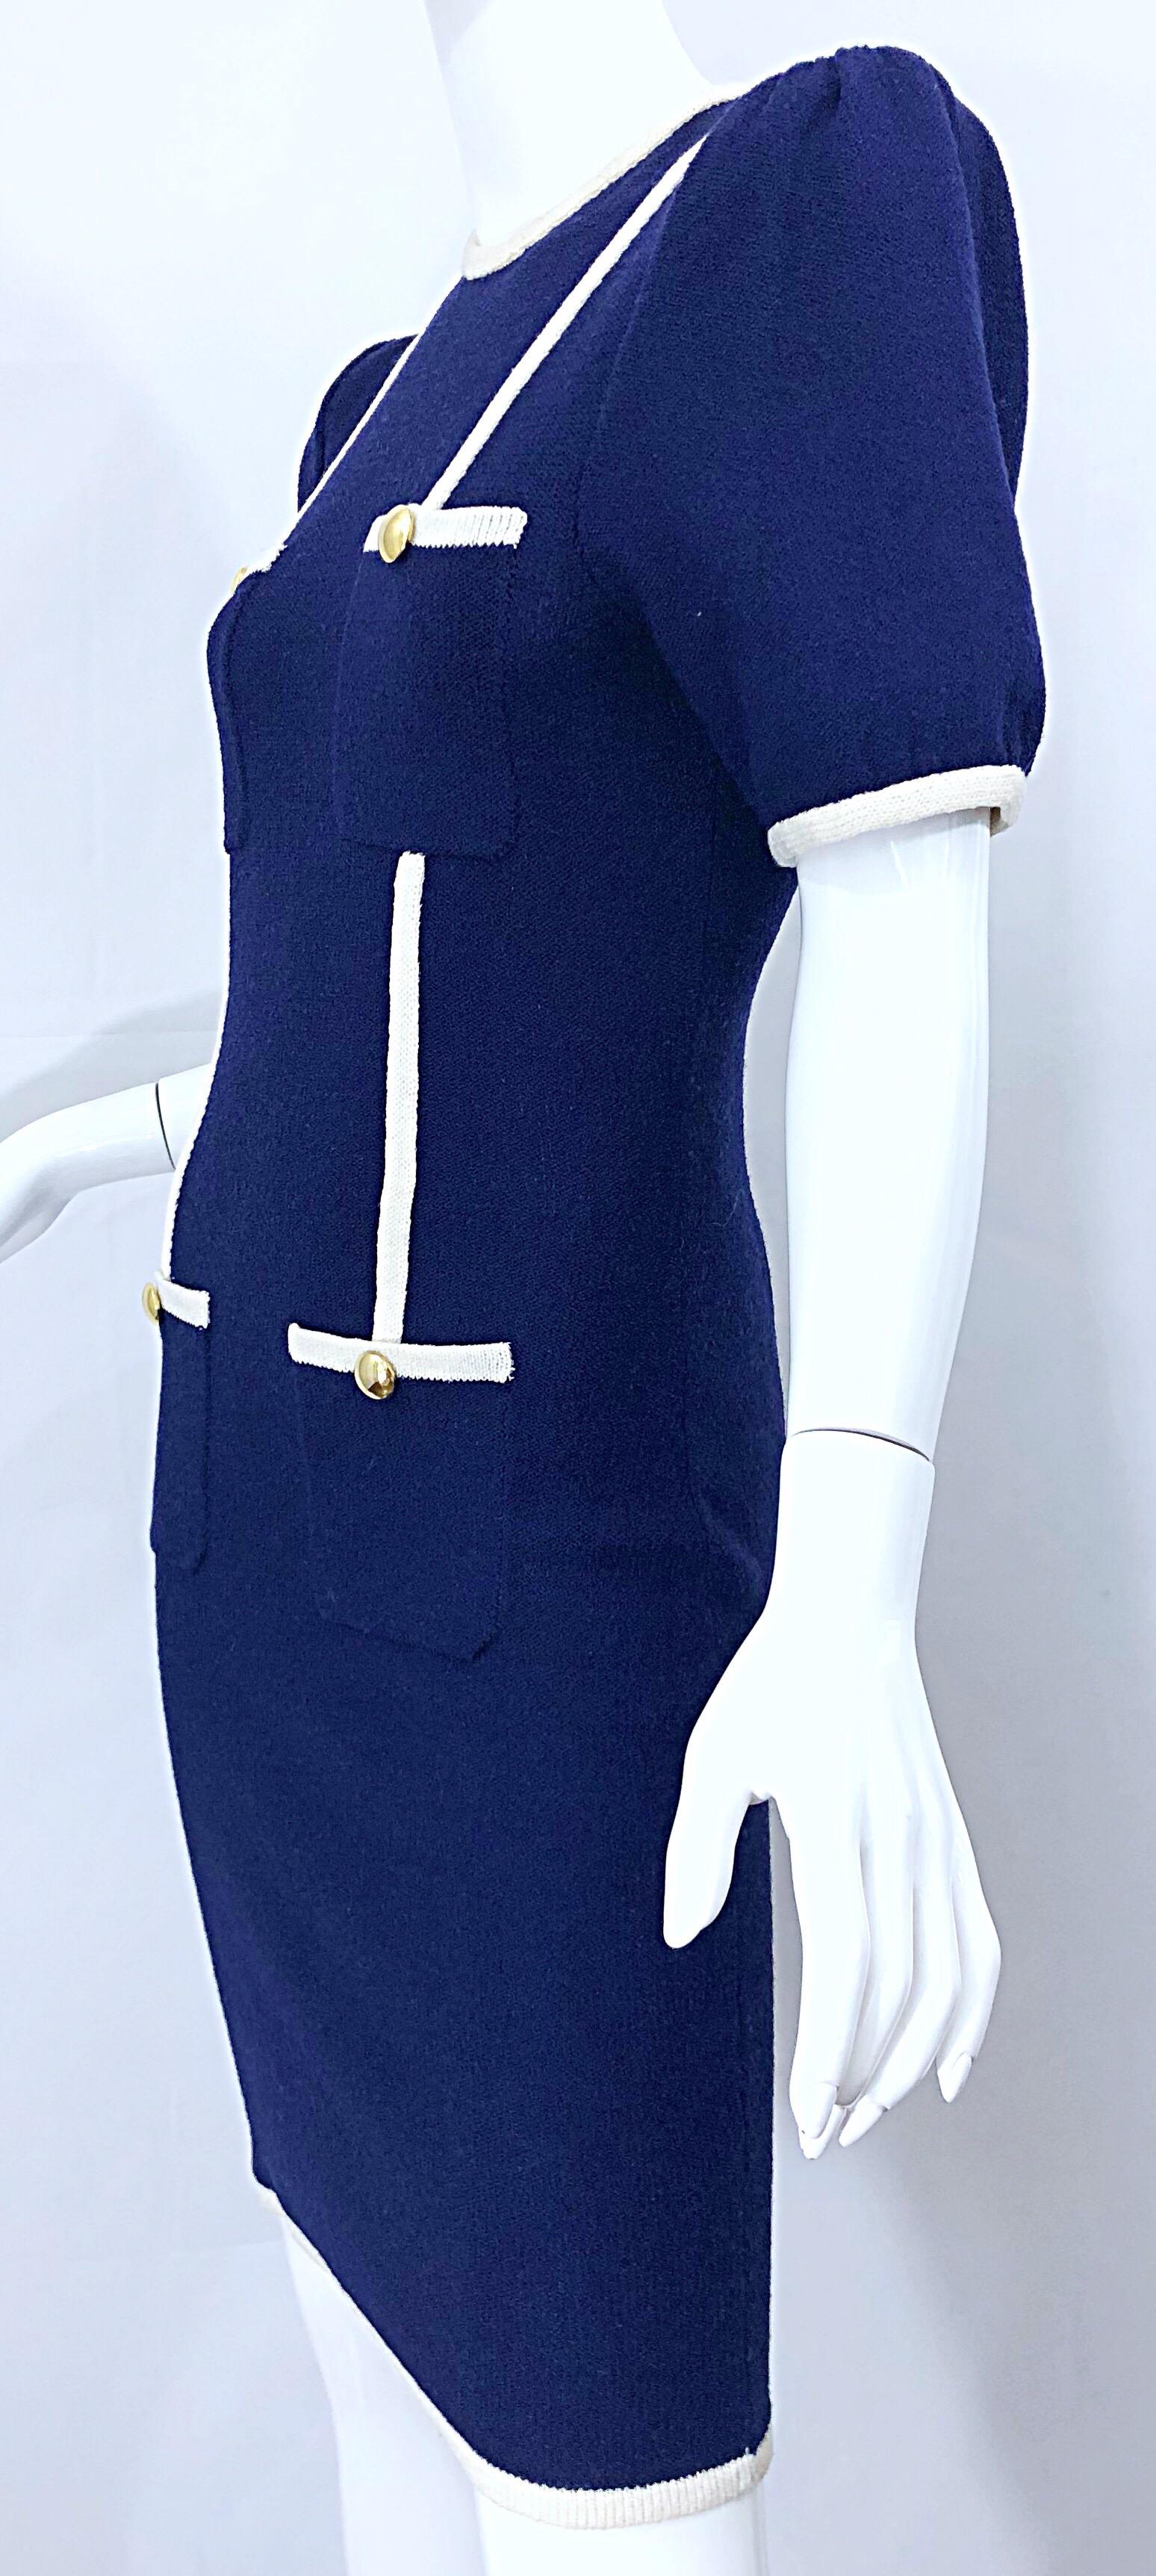 Vintage Adolfo for Saks 5th Avenue Navy Blue and White Nautical Knit Dress 6